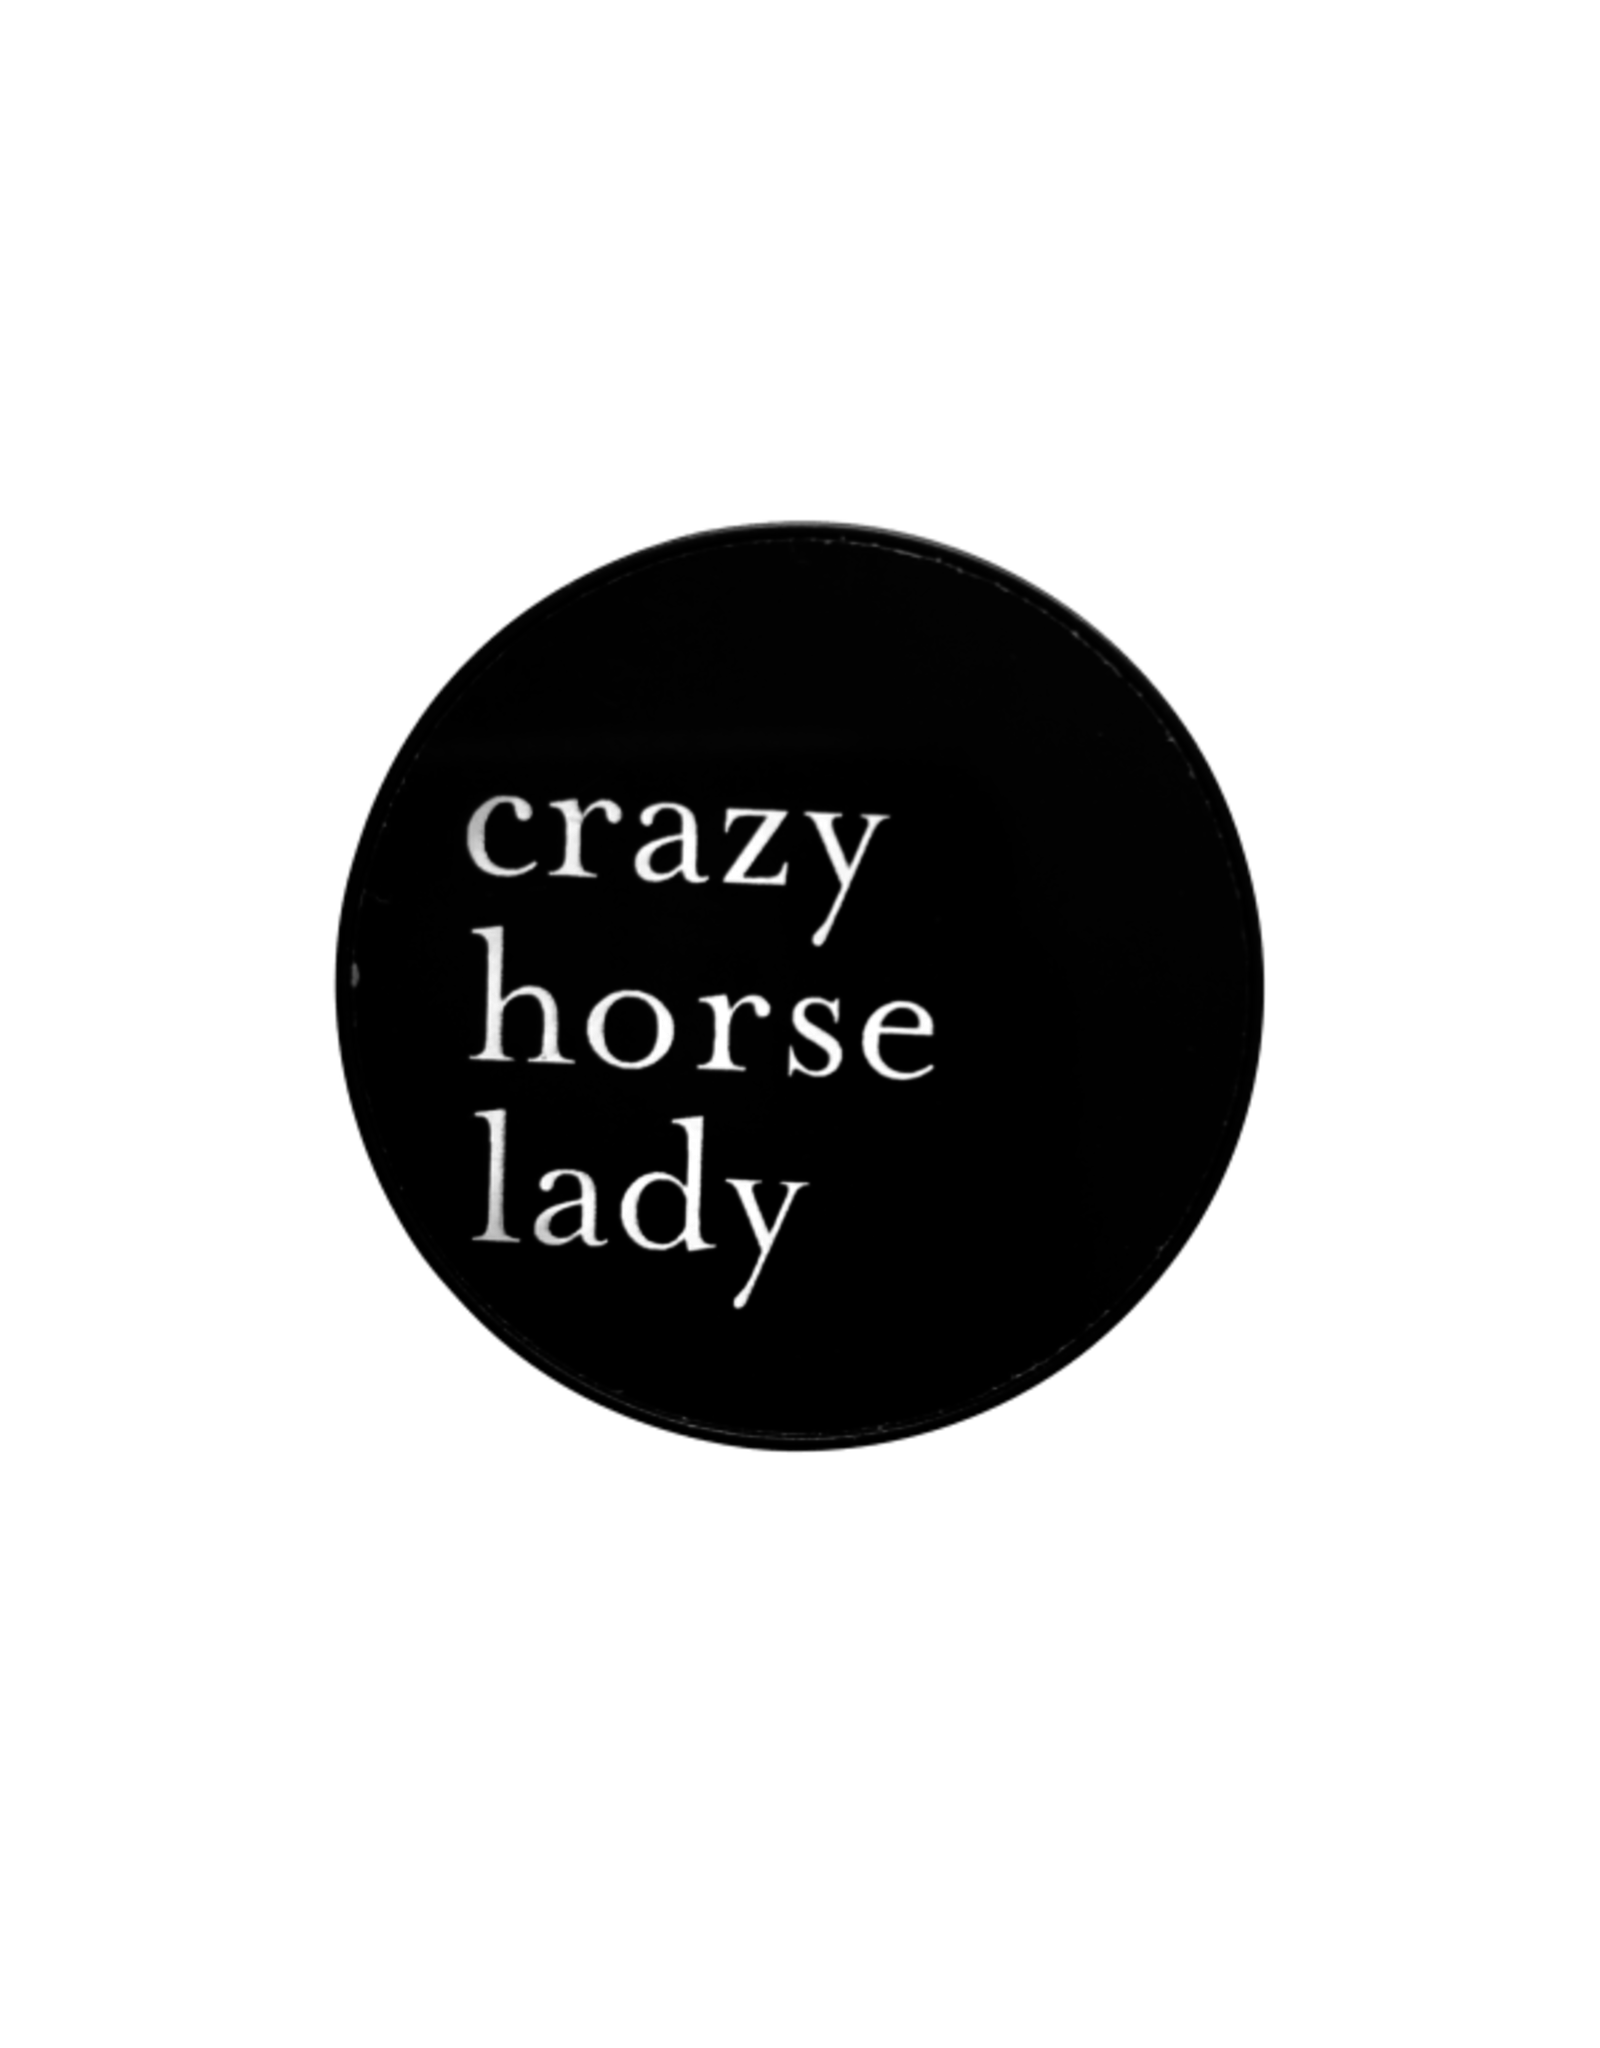 SPICED CRAZY HORSE LADY PHONE GRIP